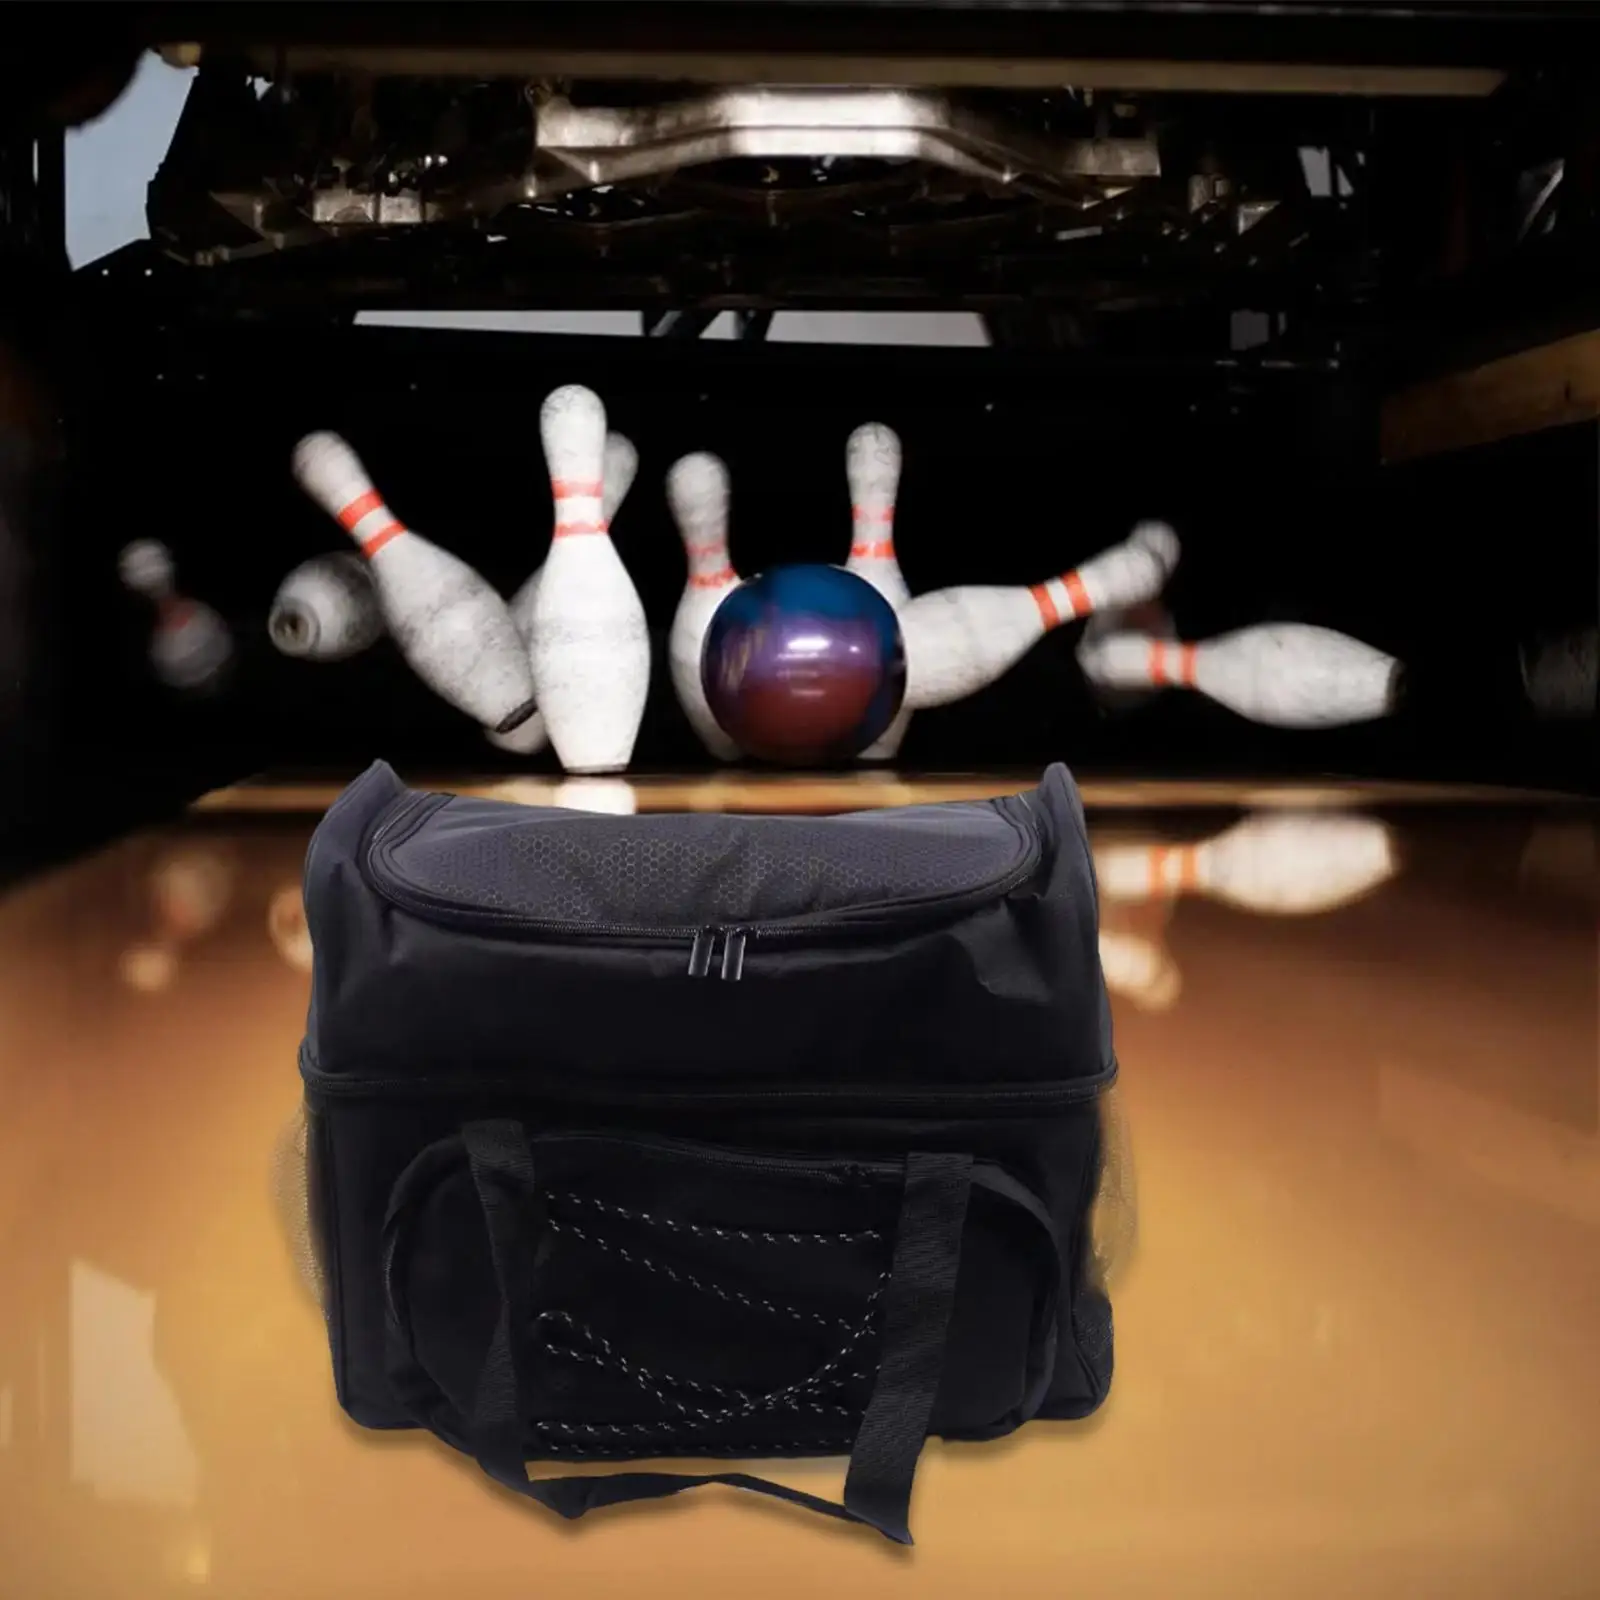 Bowling Ball Tote with Padded Divider Nylon Ball Holder Protective Bowling Ball Bag Pouch Fits Bowling Shoes up to Mens Size 16